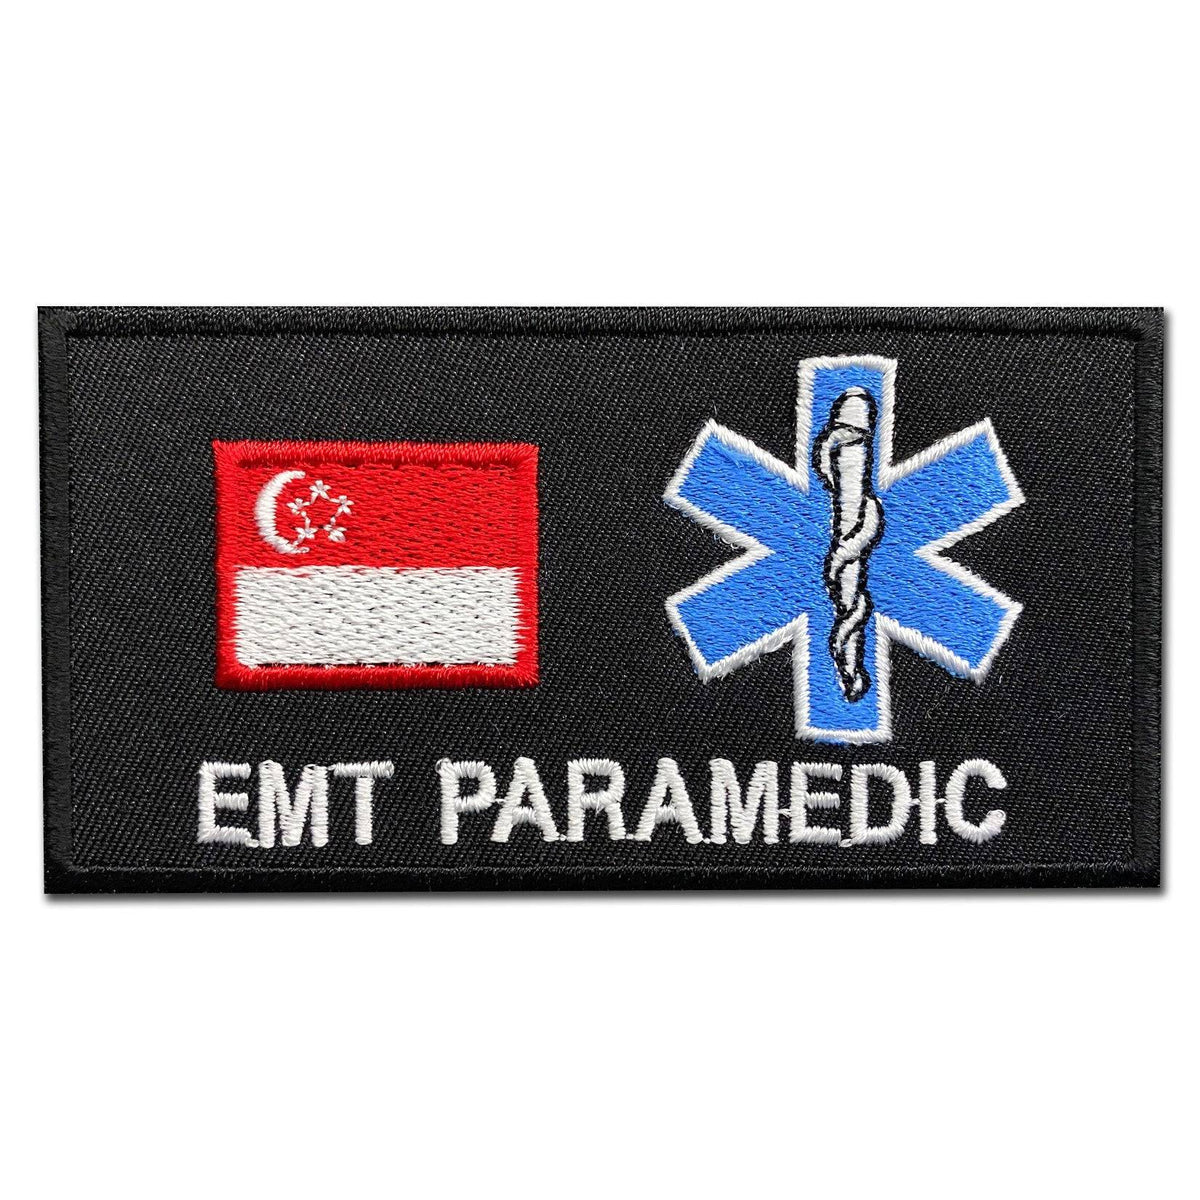 EMT PARAMEDIC CALL SIGN PATCH - The Morale Patches